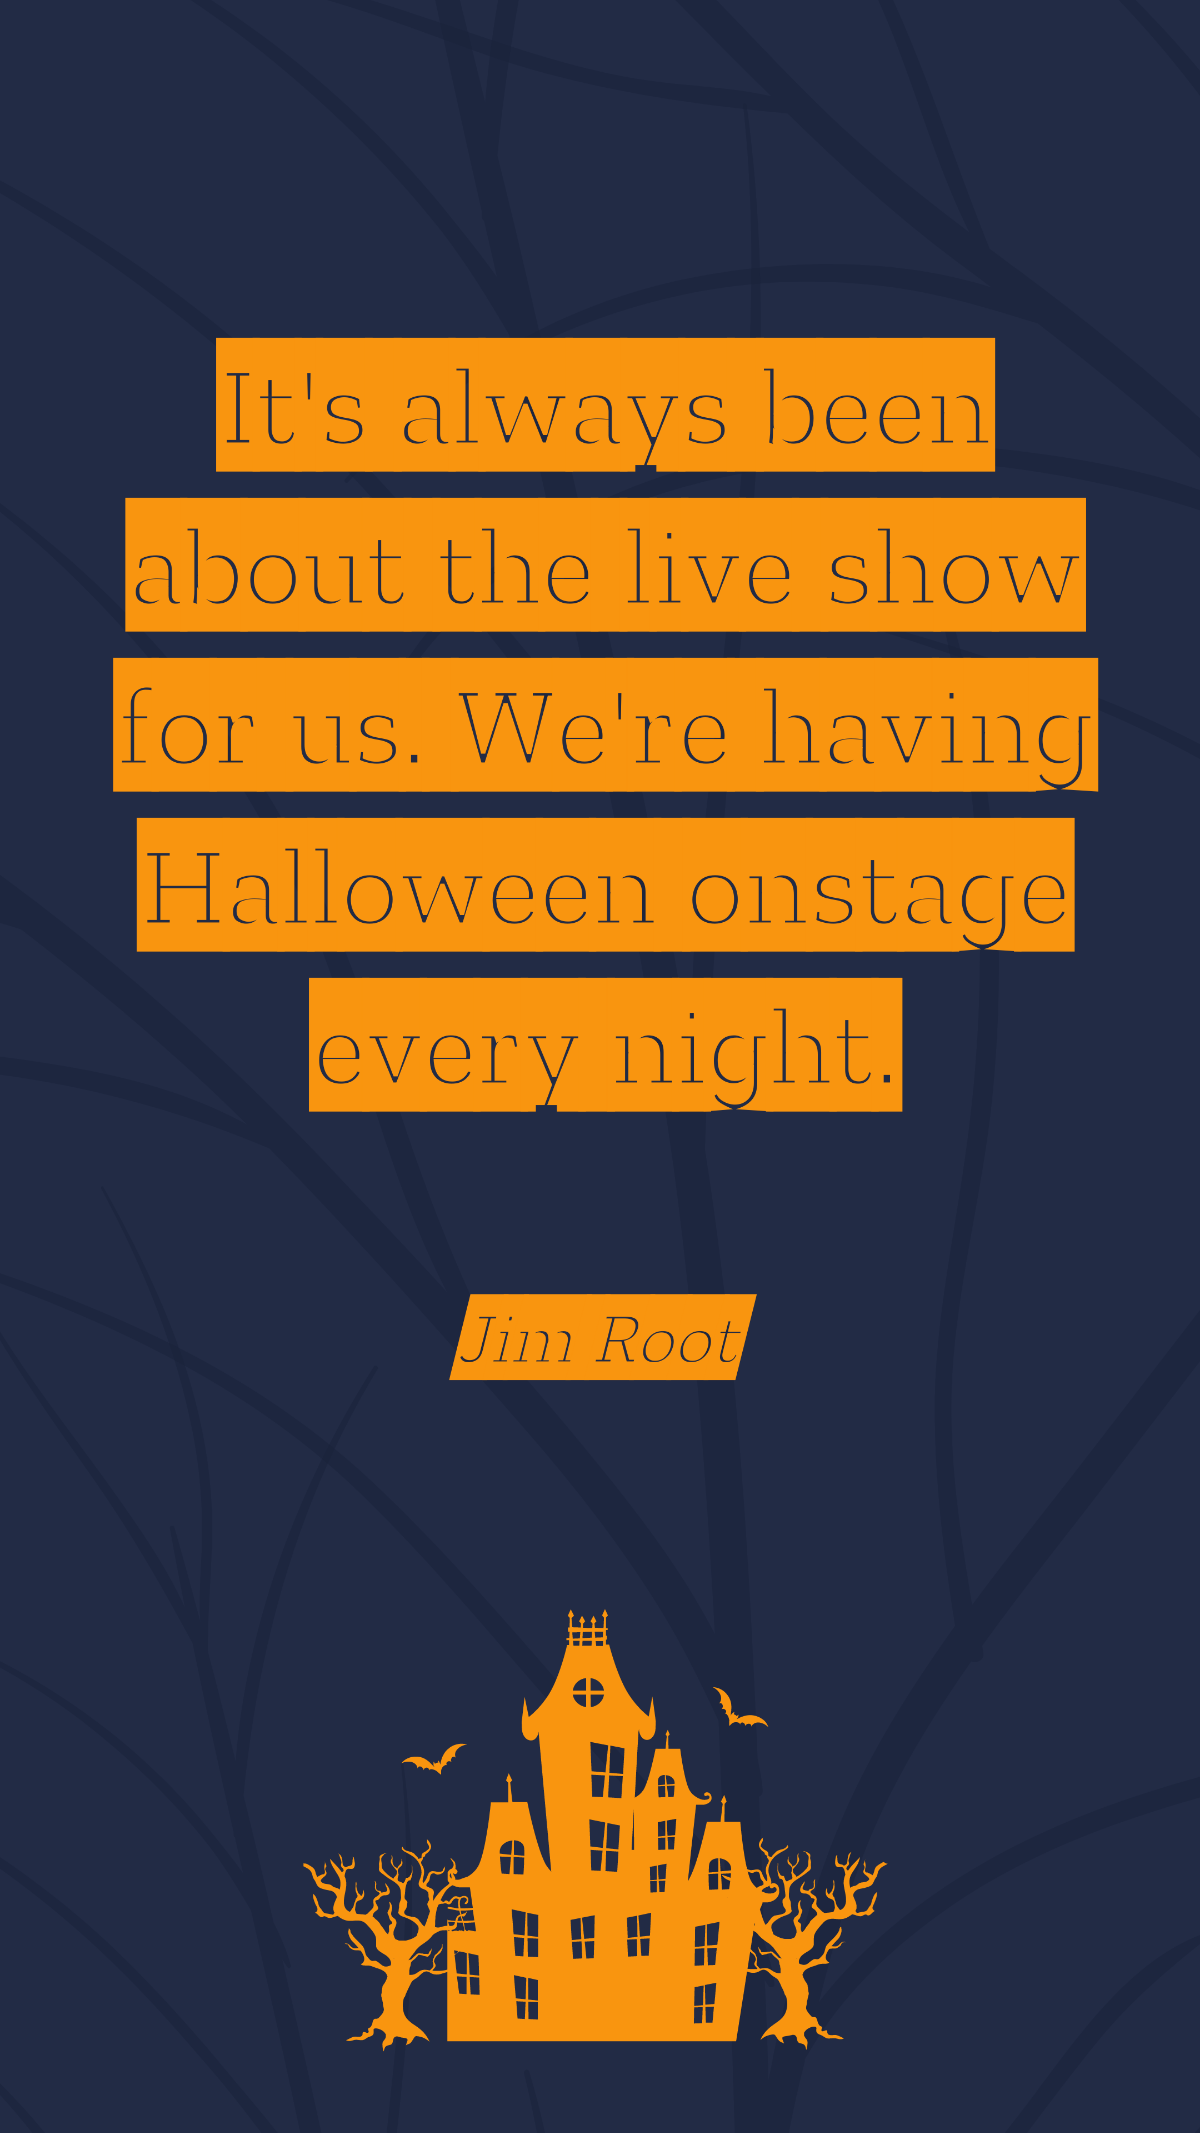 Jim Root - It's always been about the live show for us. We're having Halloween onstage every night. Template